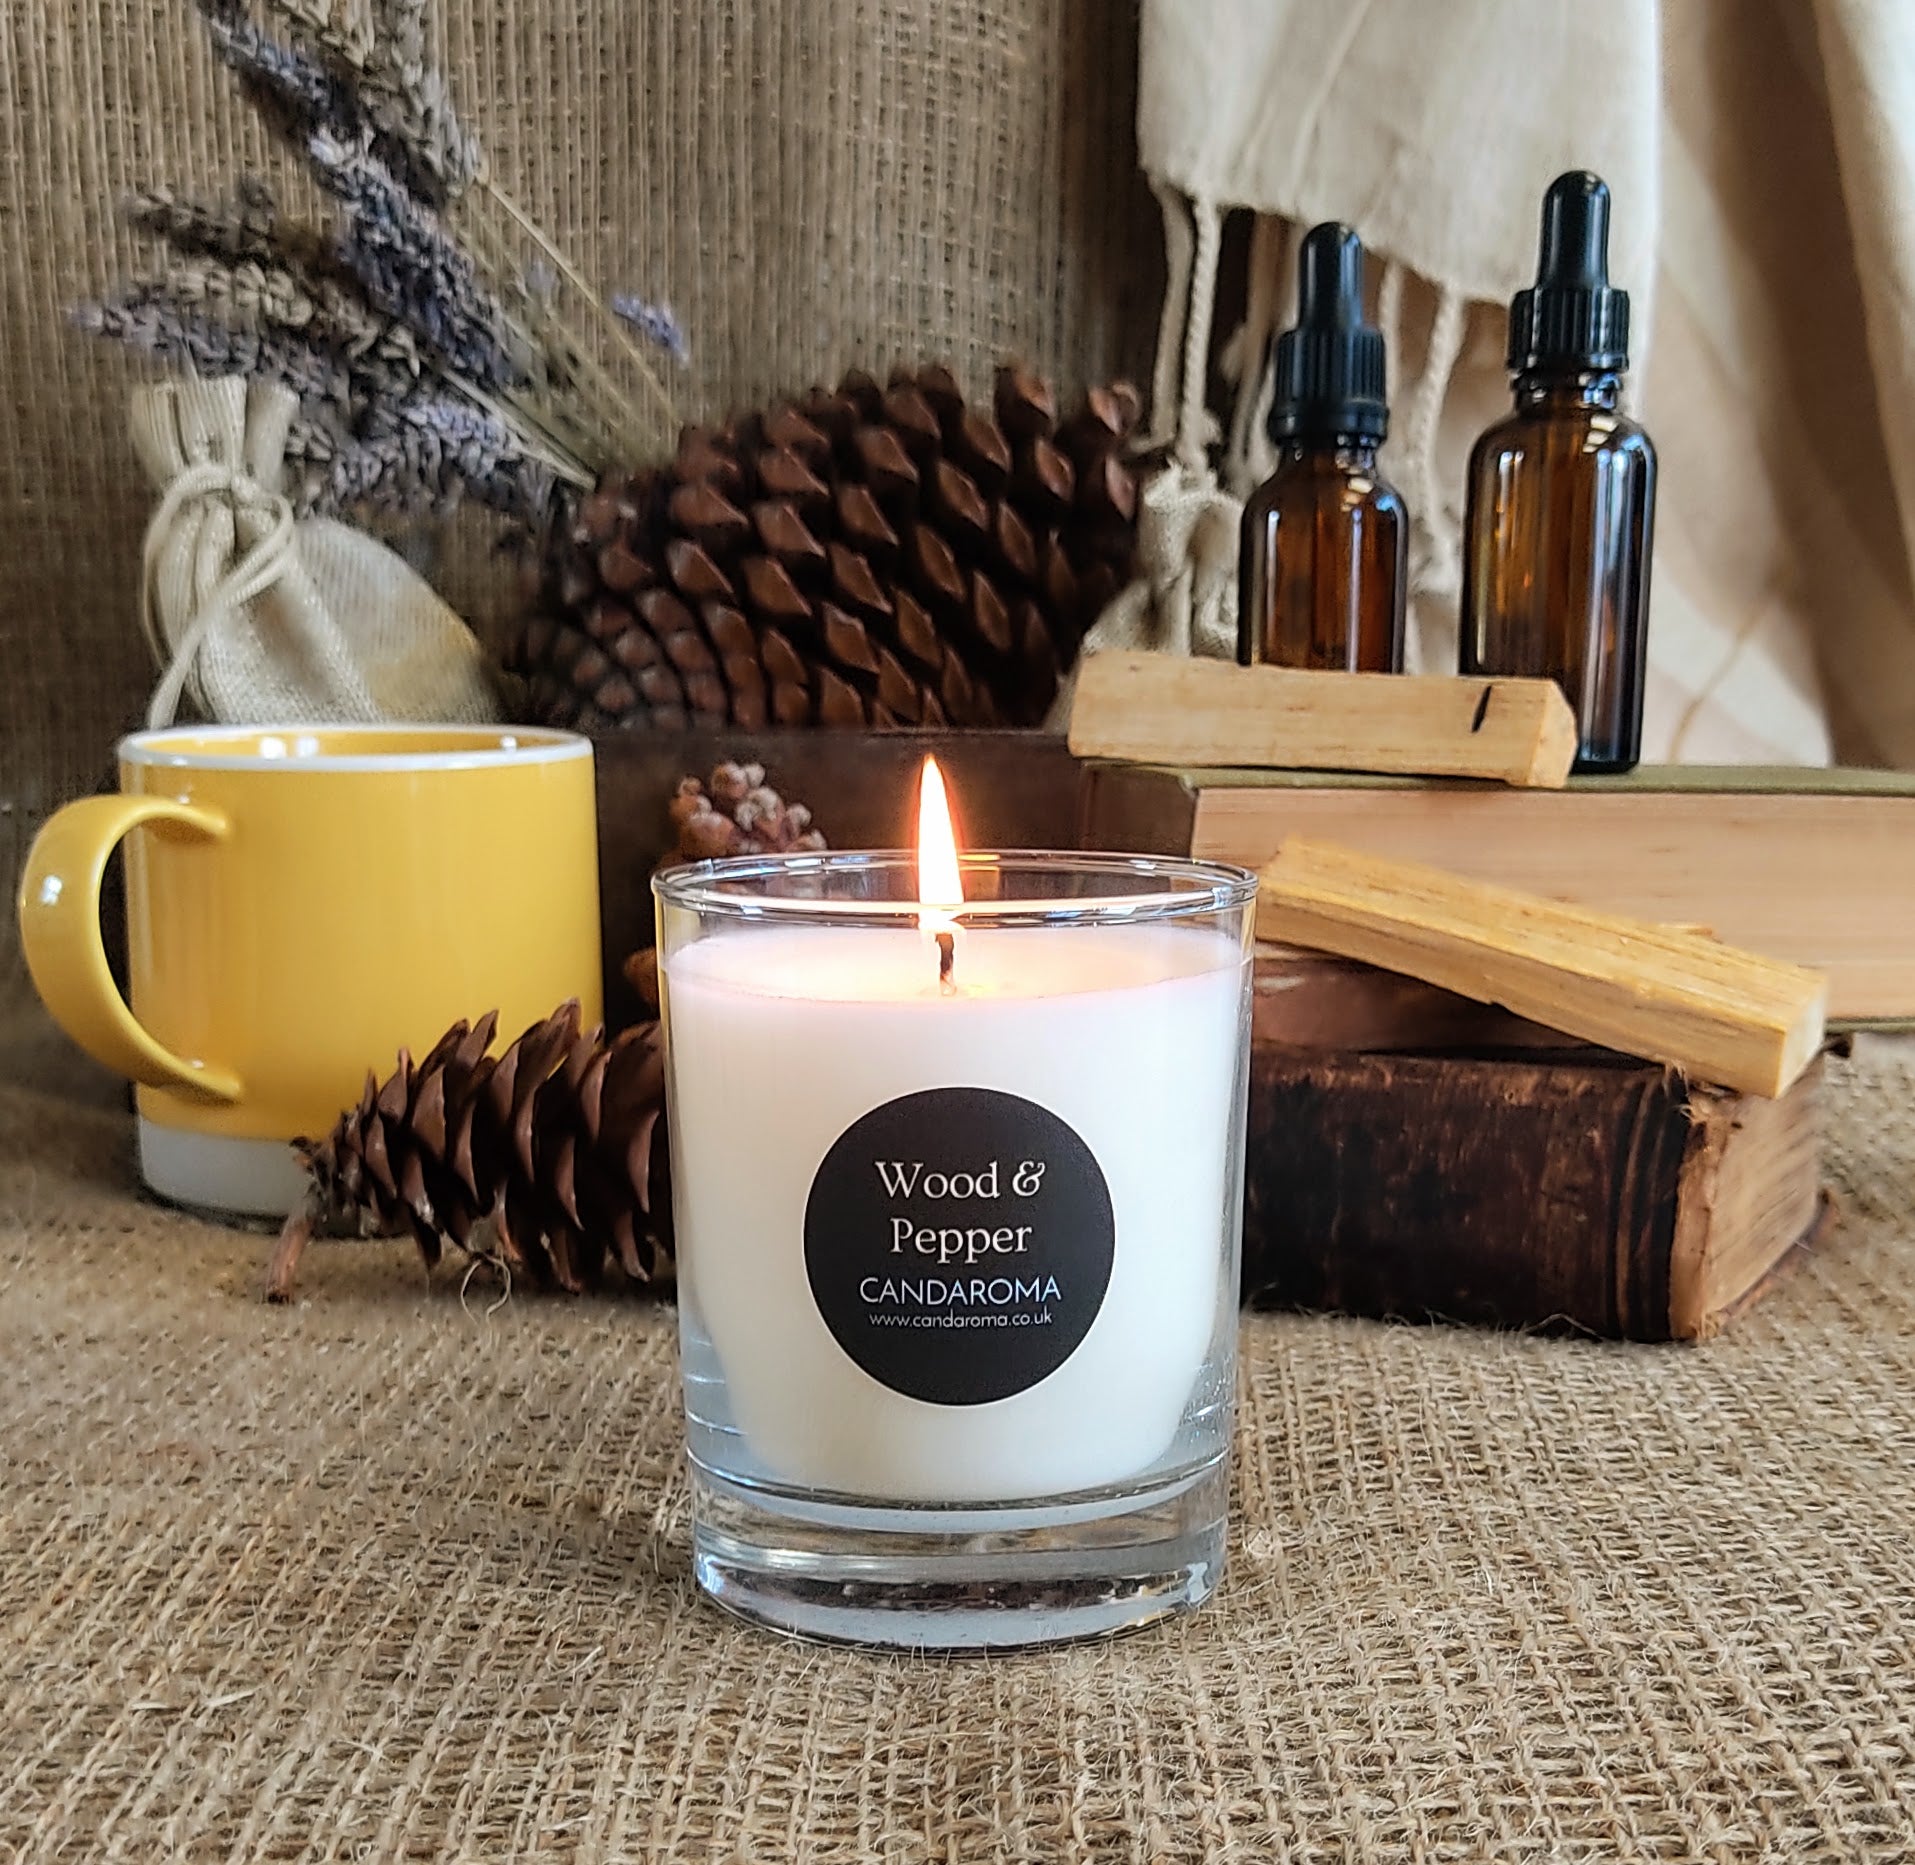 Wood & pepper soy blend candle